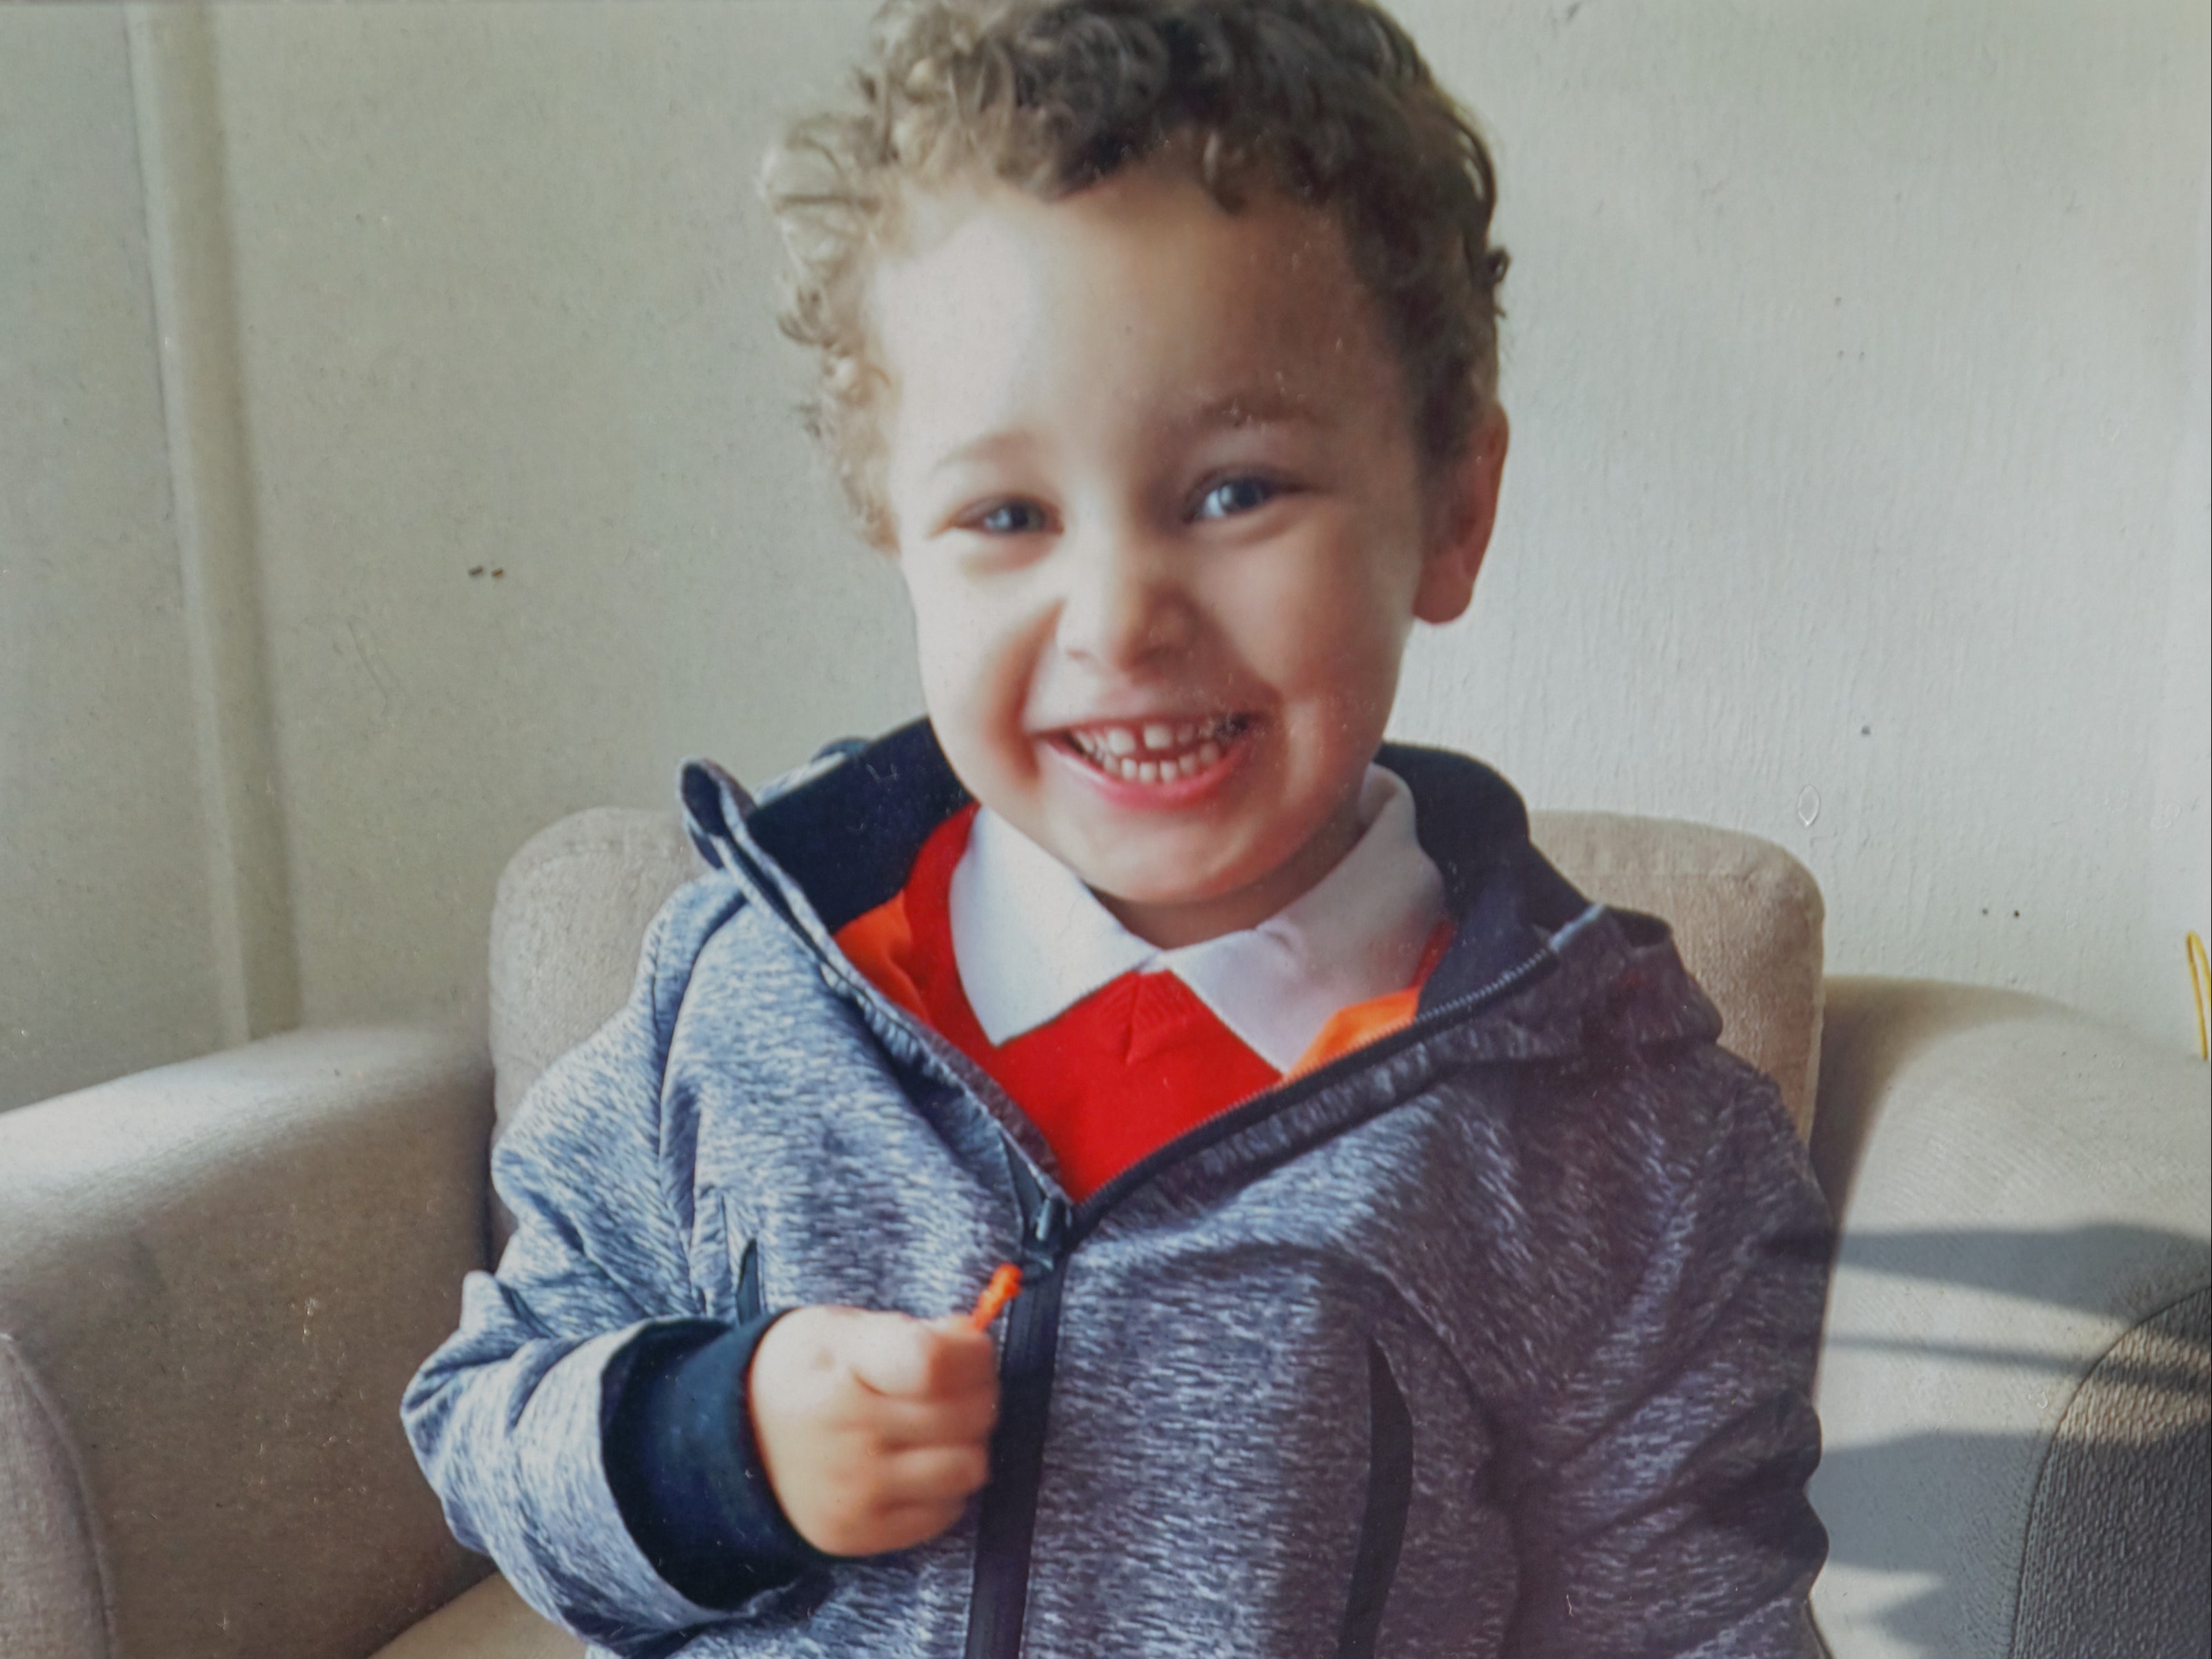 Five-year-old Logan Mwangi was found dead in the River Ogmore in South Wales